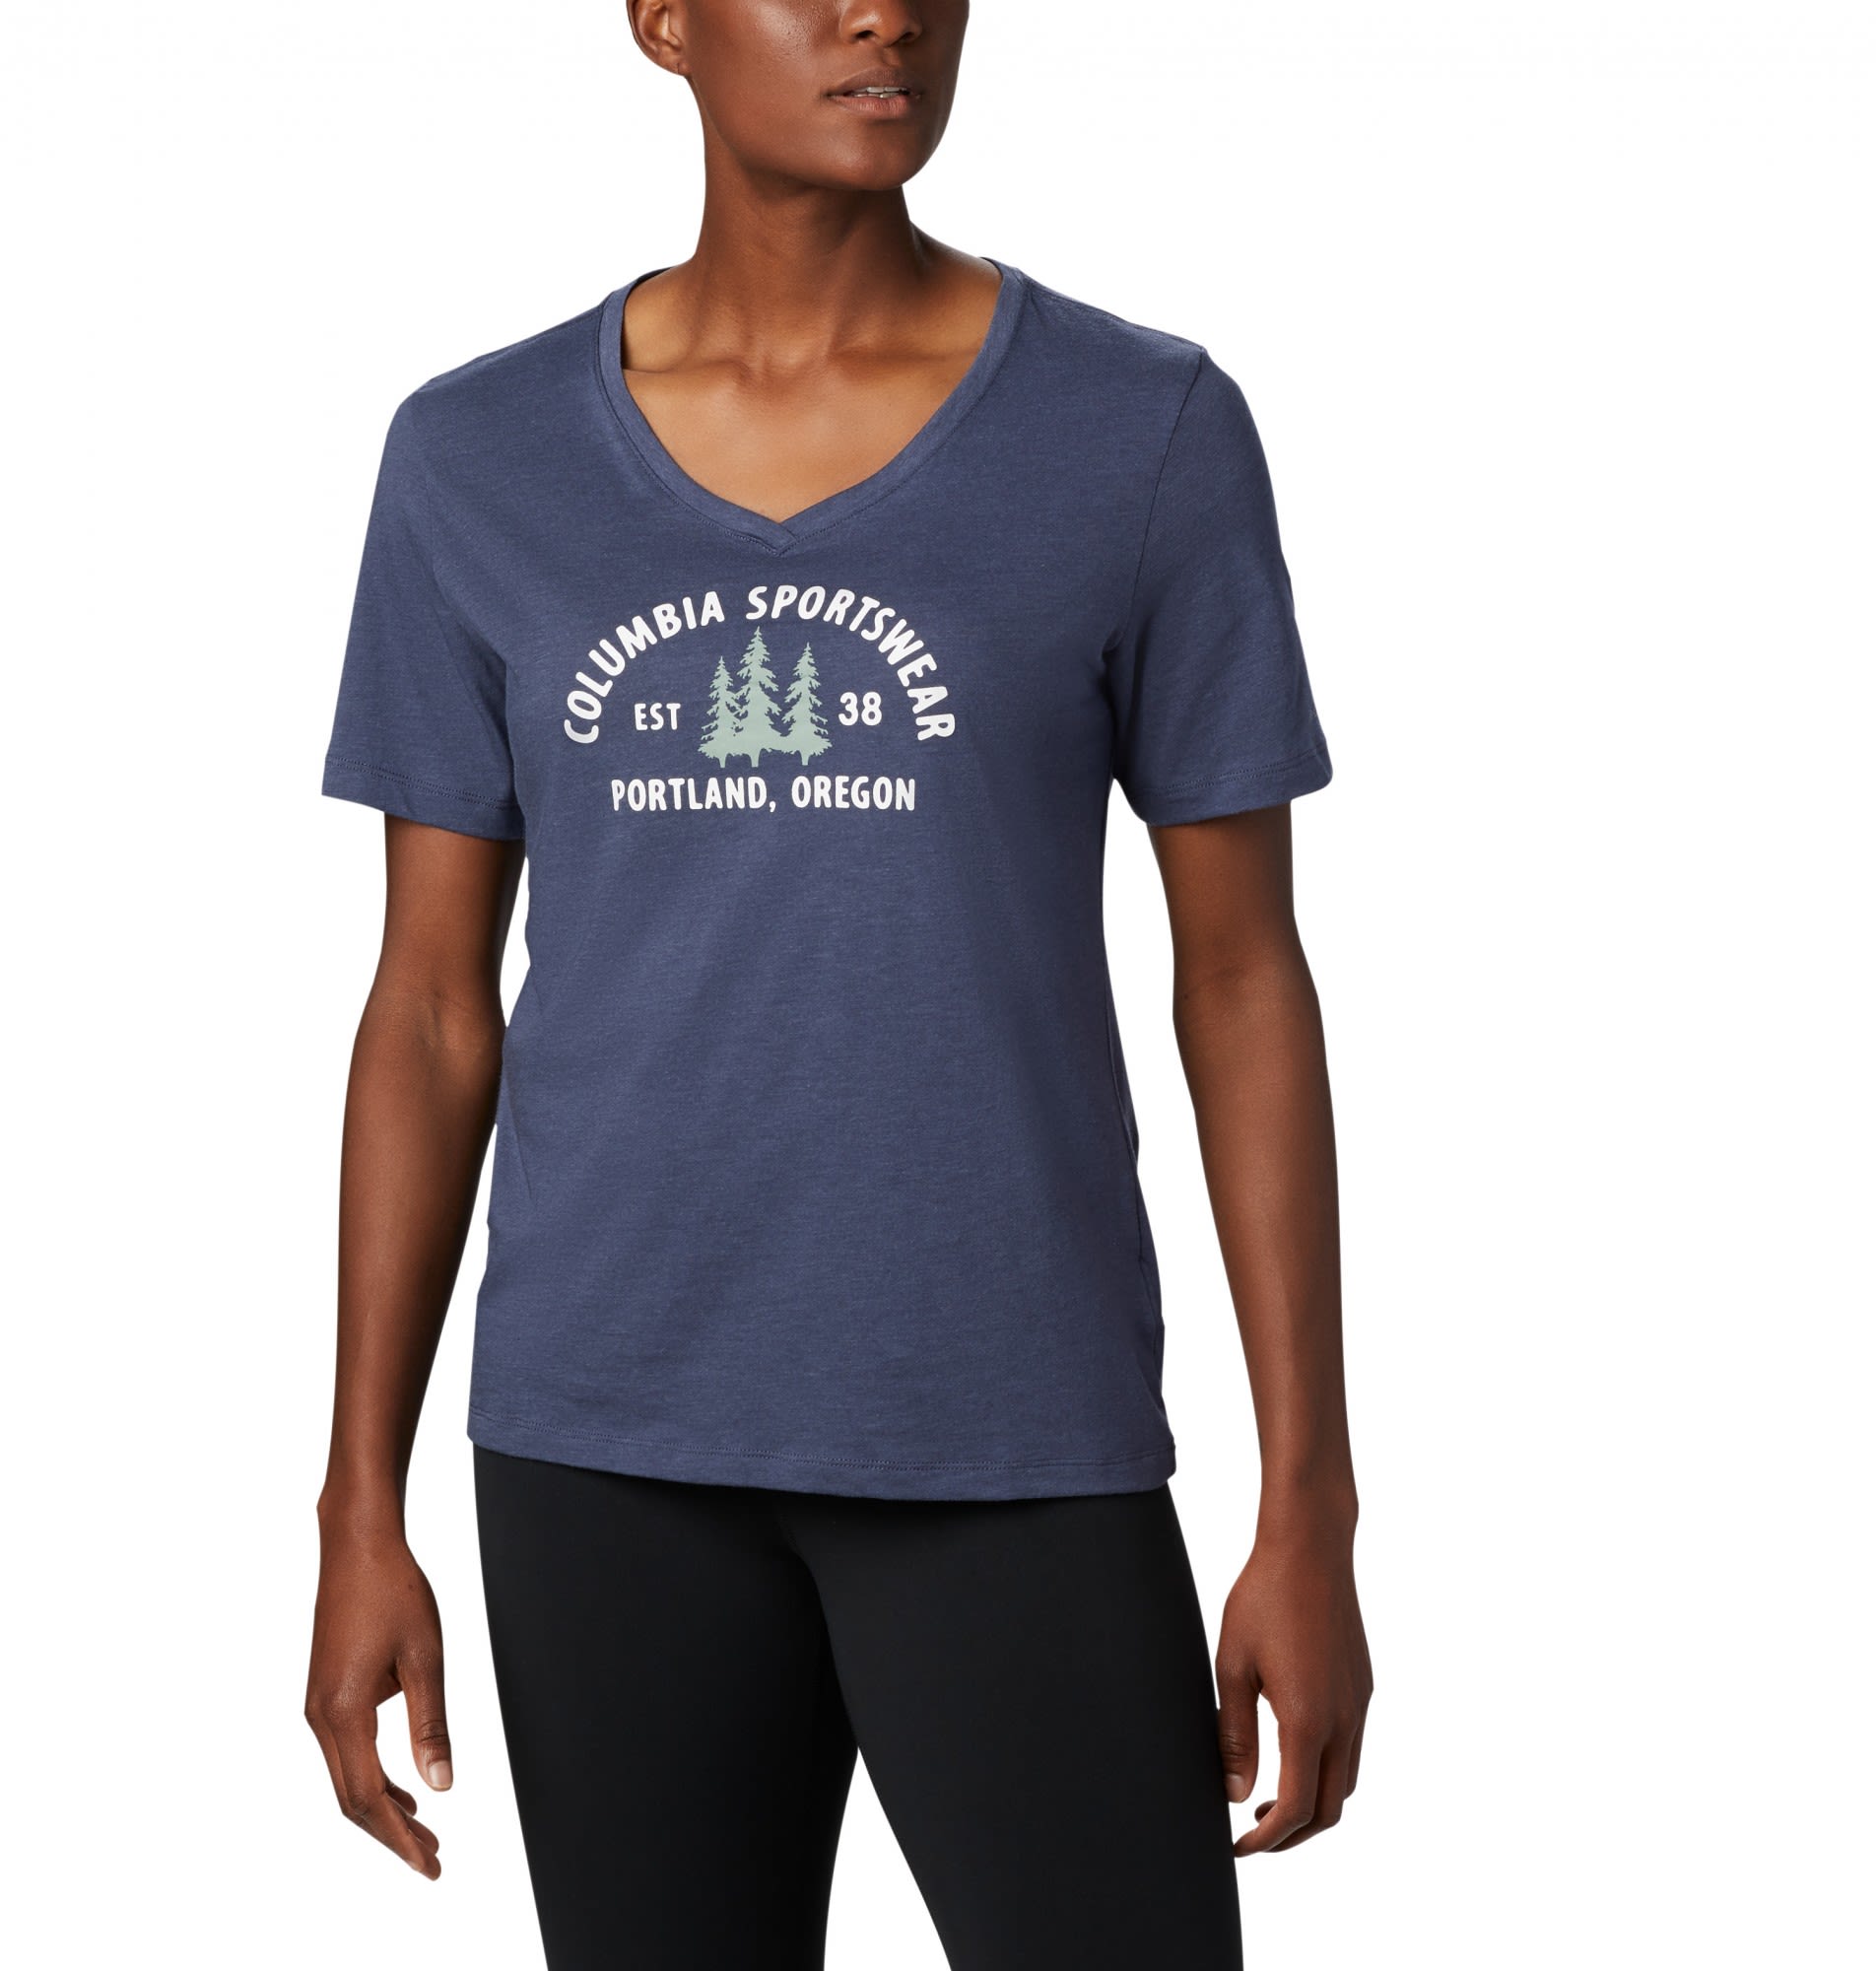 Columbia Mount Rose Relaxed Tee Blau- Female Kurzarm-Shirts- Grsse XL - Farbe Nocturnal Heather - CSC Badge